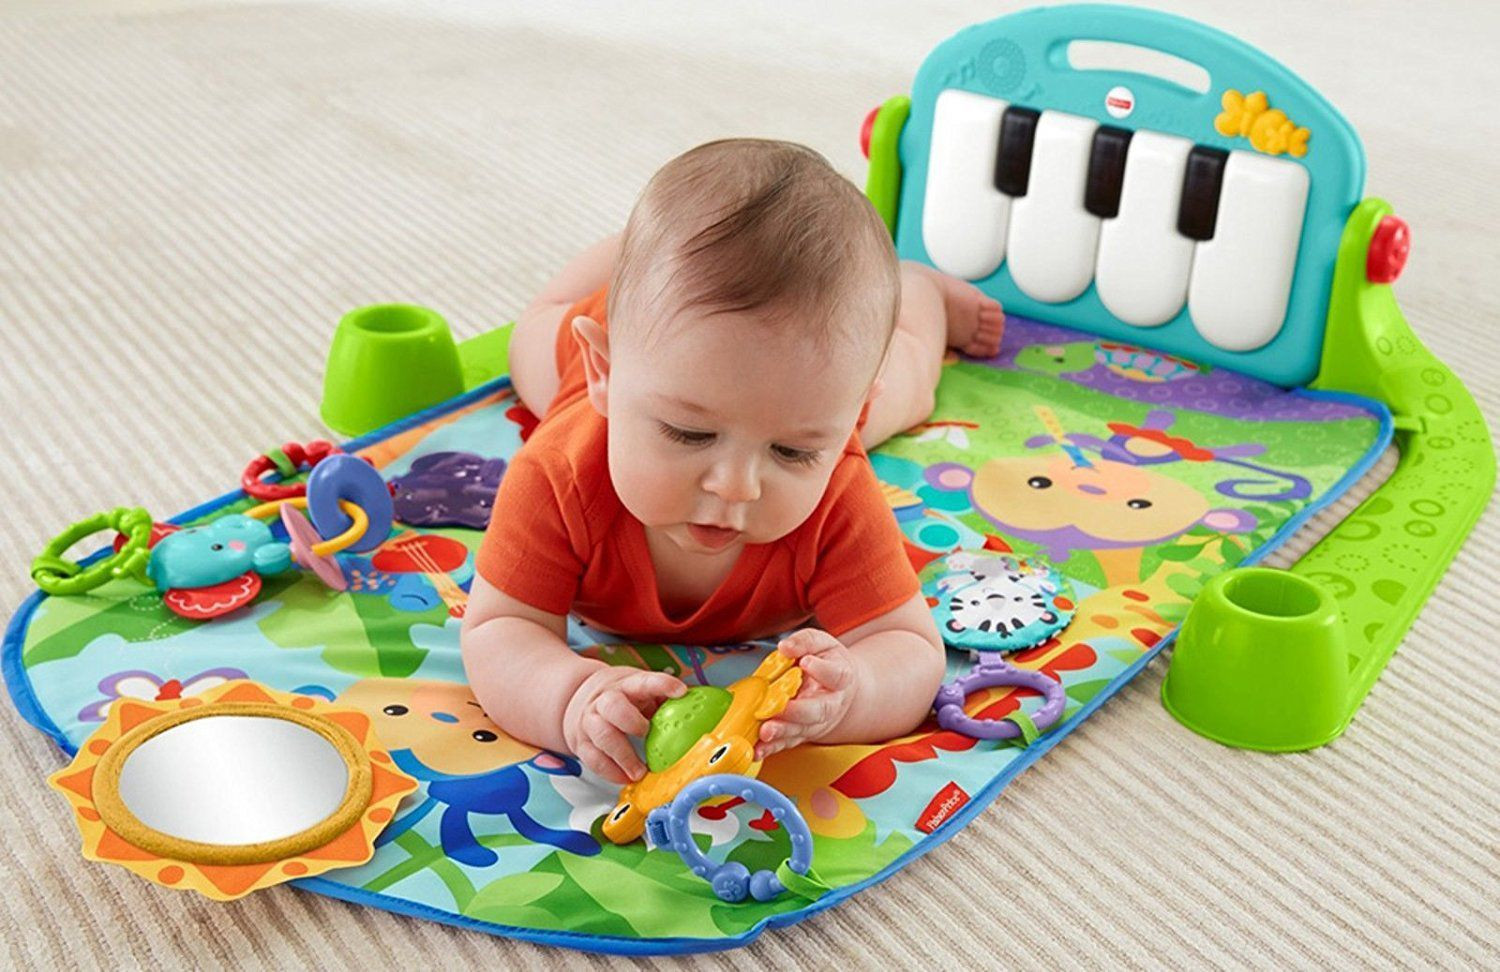 Ideas For New Baby Gift
 The 34 Best Baby Gifts of 2020